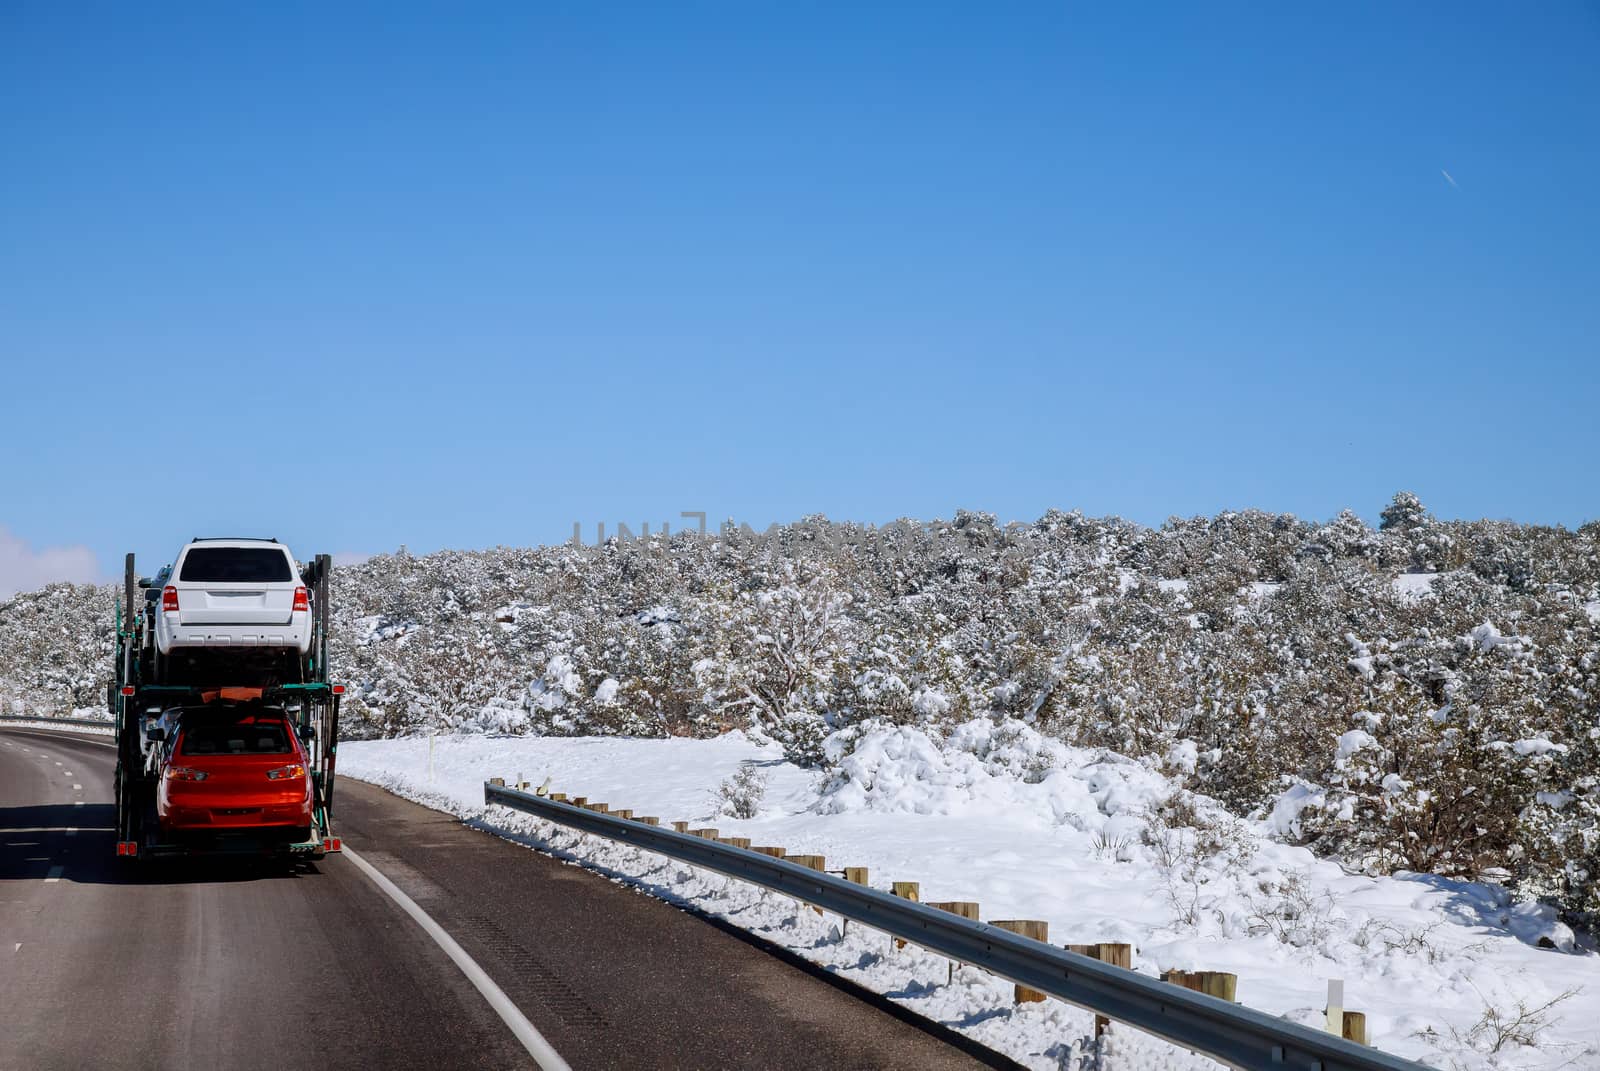 The trailer transports cars on highway winter road with snow landscape in the mountains